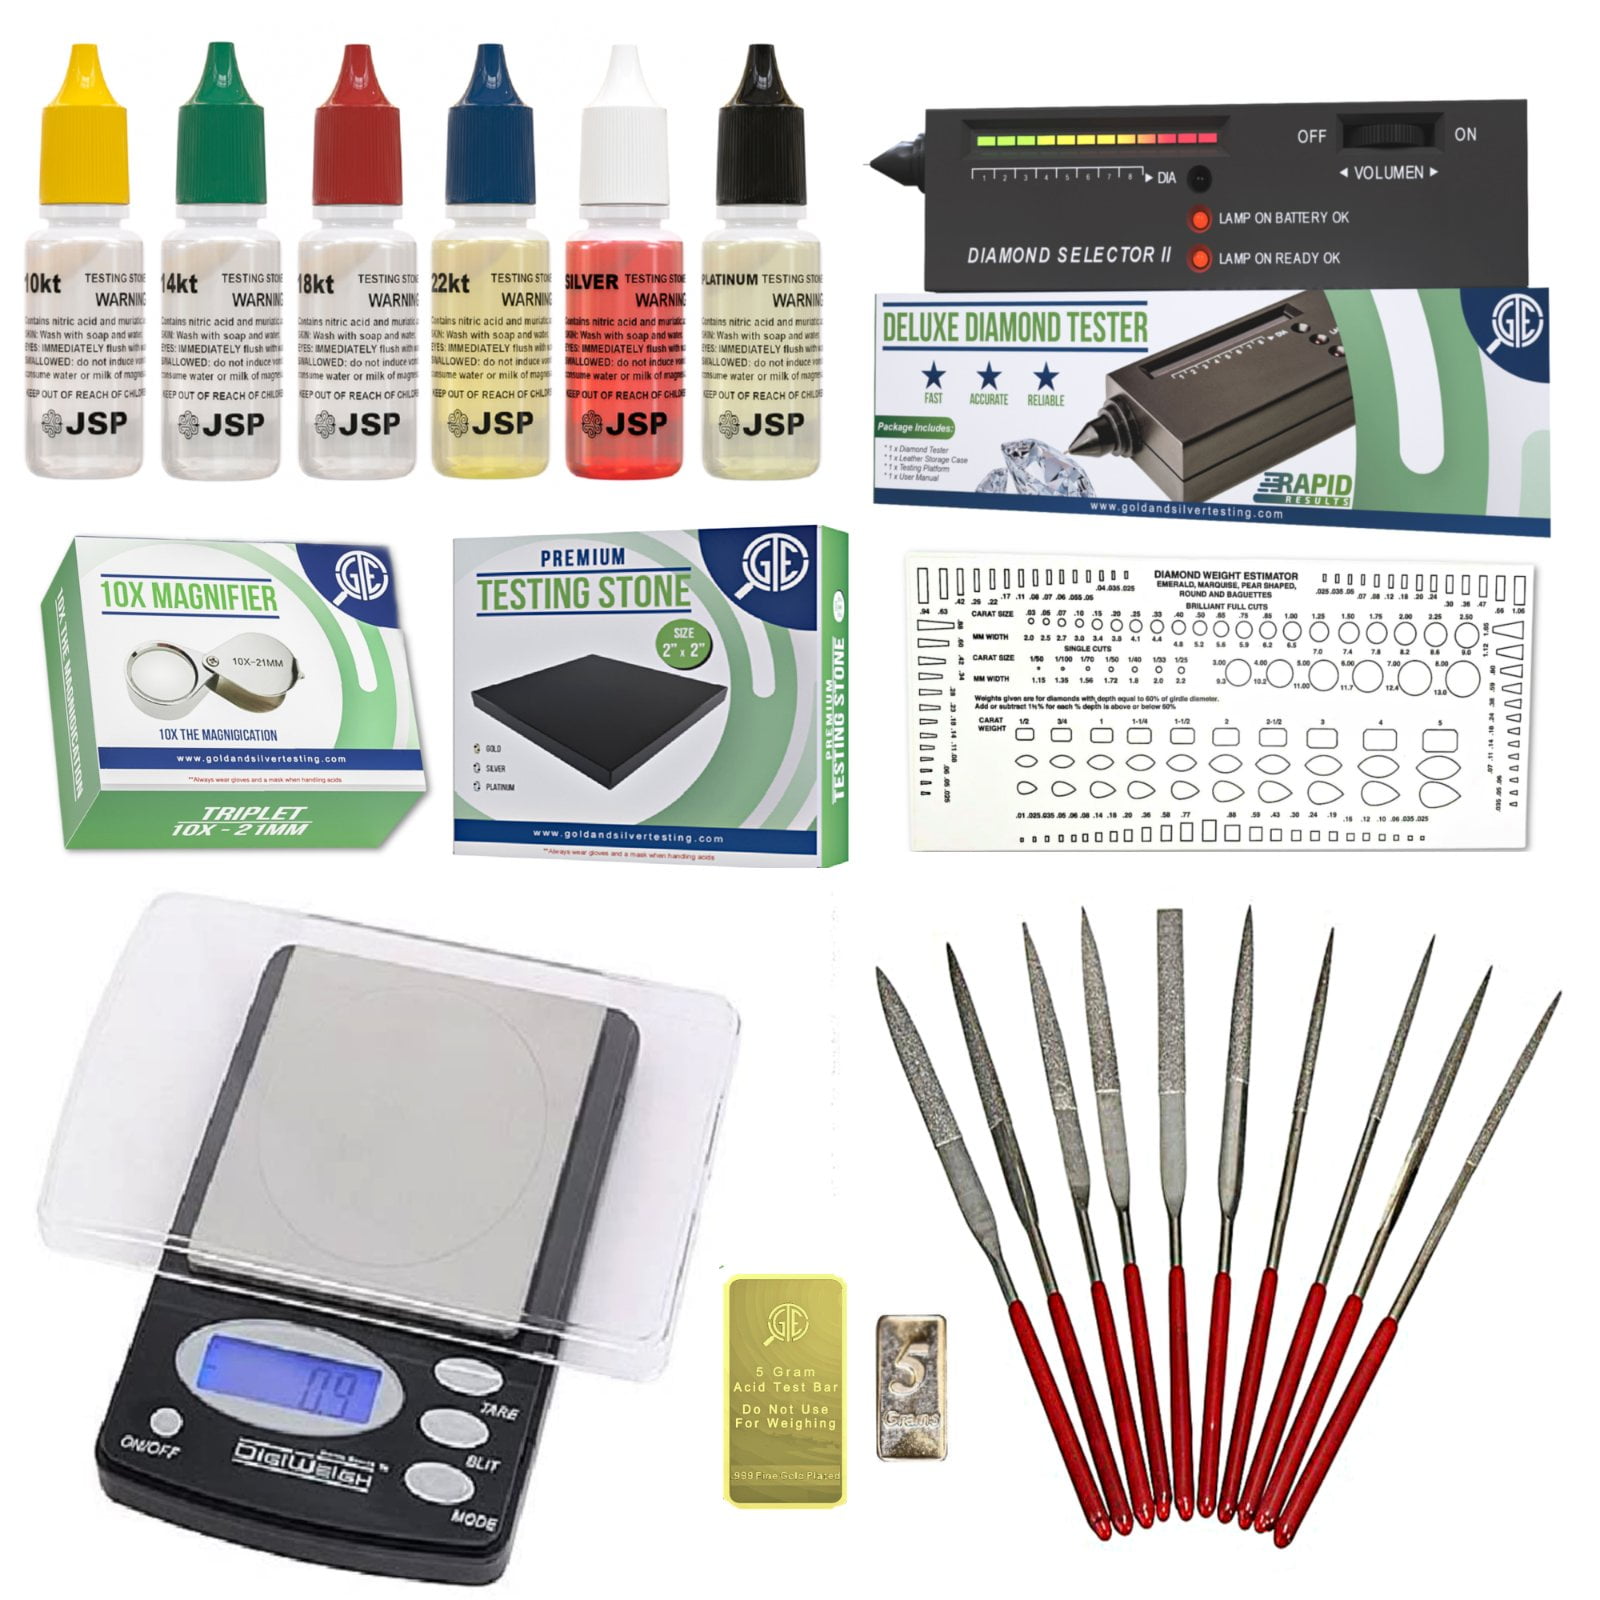 PuriTEST Complete Jewelers Hand Tool Kit Scale Magnification Loupe and Files Diamond Tester Test Stones Acid Solutions 